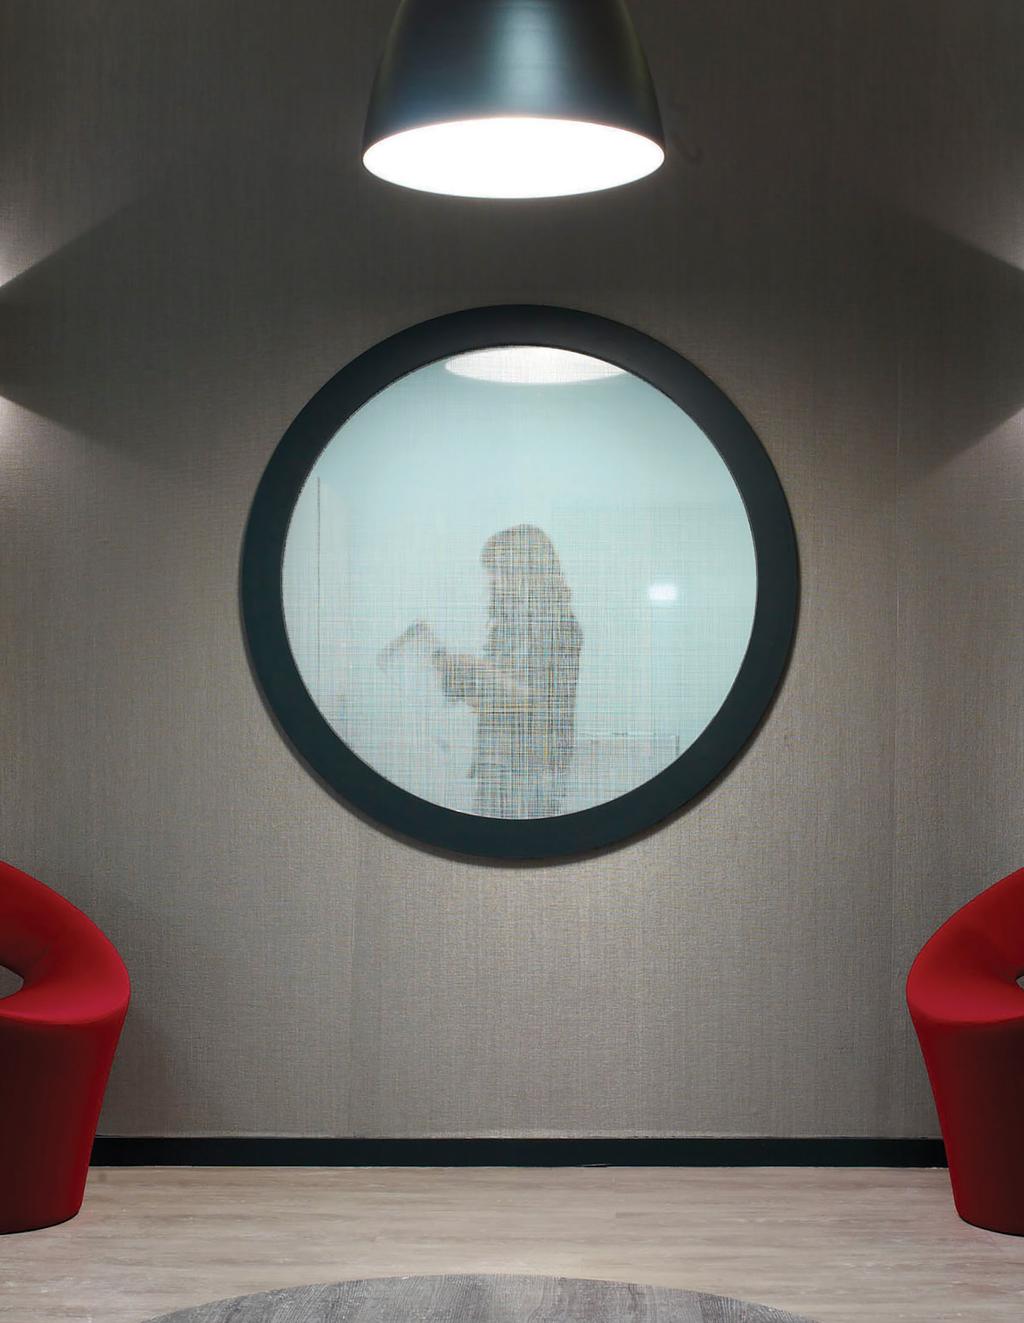 3M FASARA Glass Finishes The perfect blend of optical beauty and affordability, 3M FASARA Glass Finishes offer a simple solution for creating the illusion of etched, treated or textured glass.